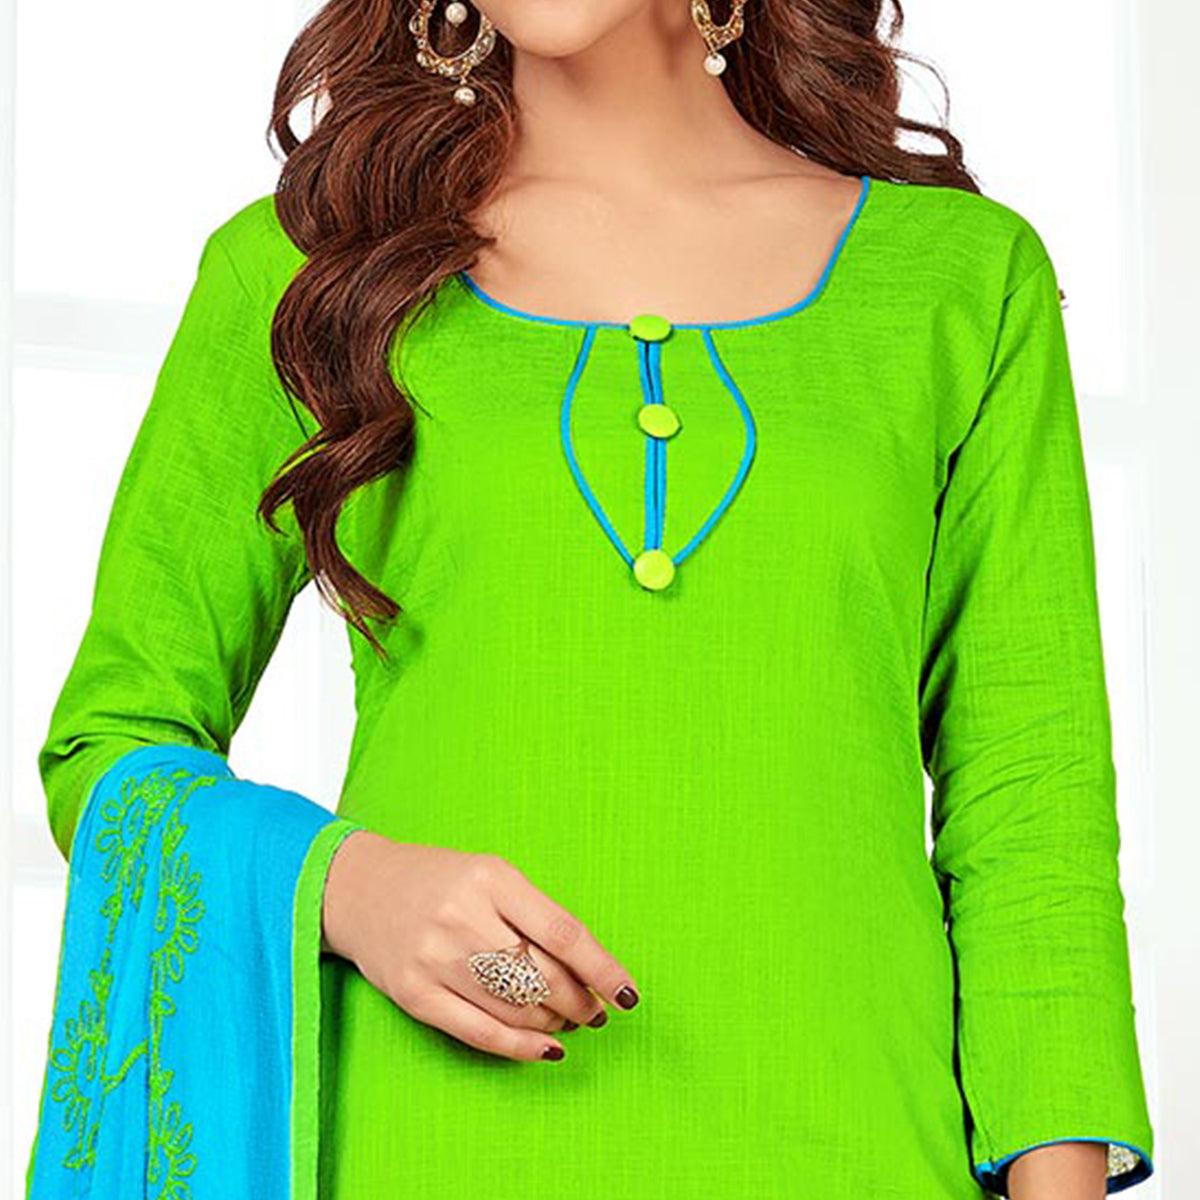 Catchy Green Colored Casual Wear Cotton Suit - Peachmode